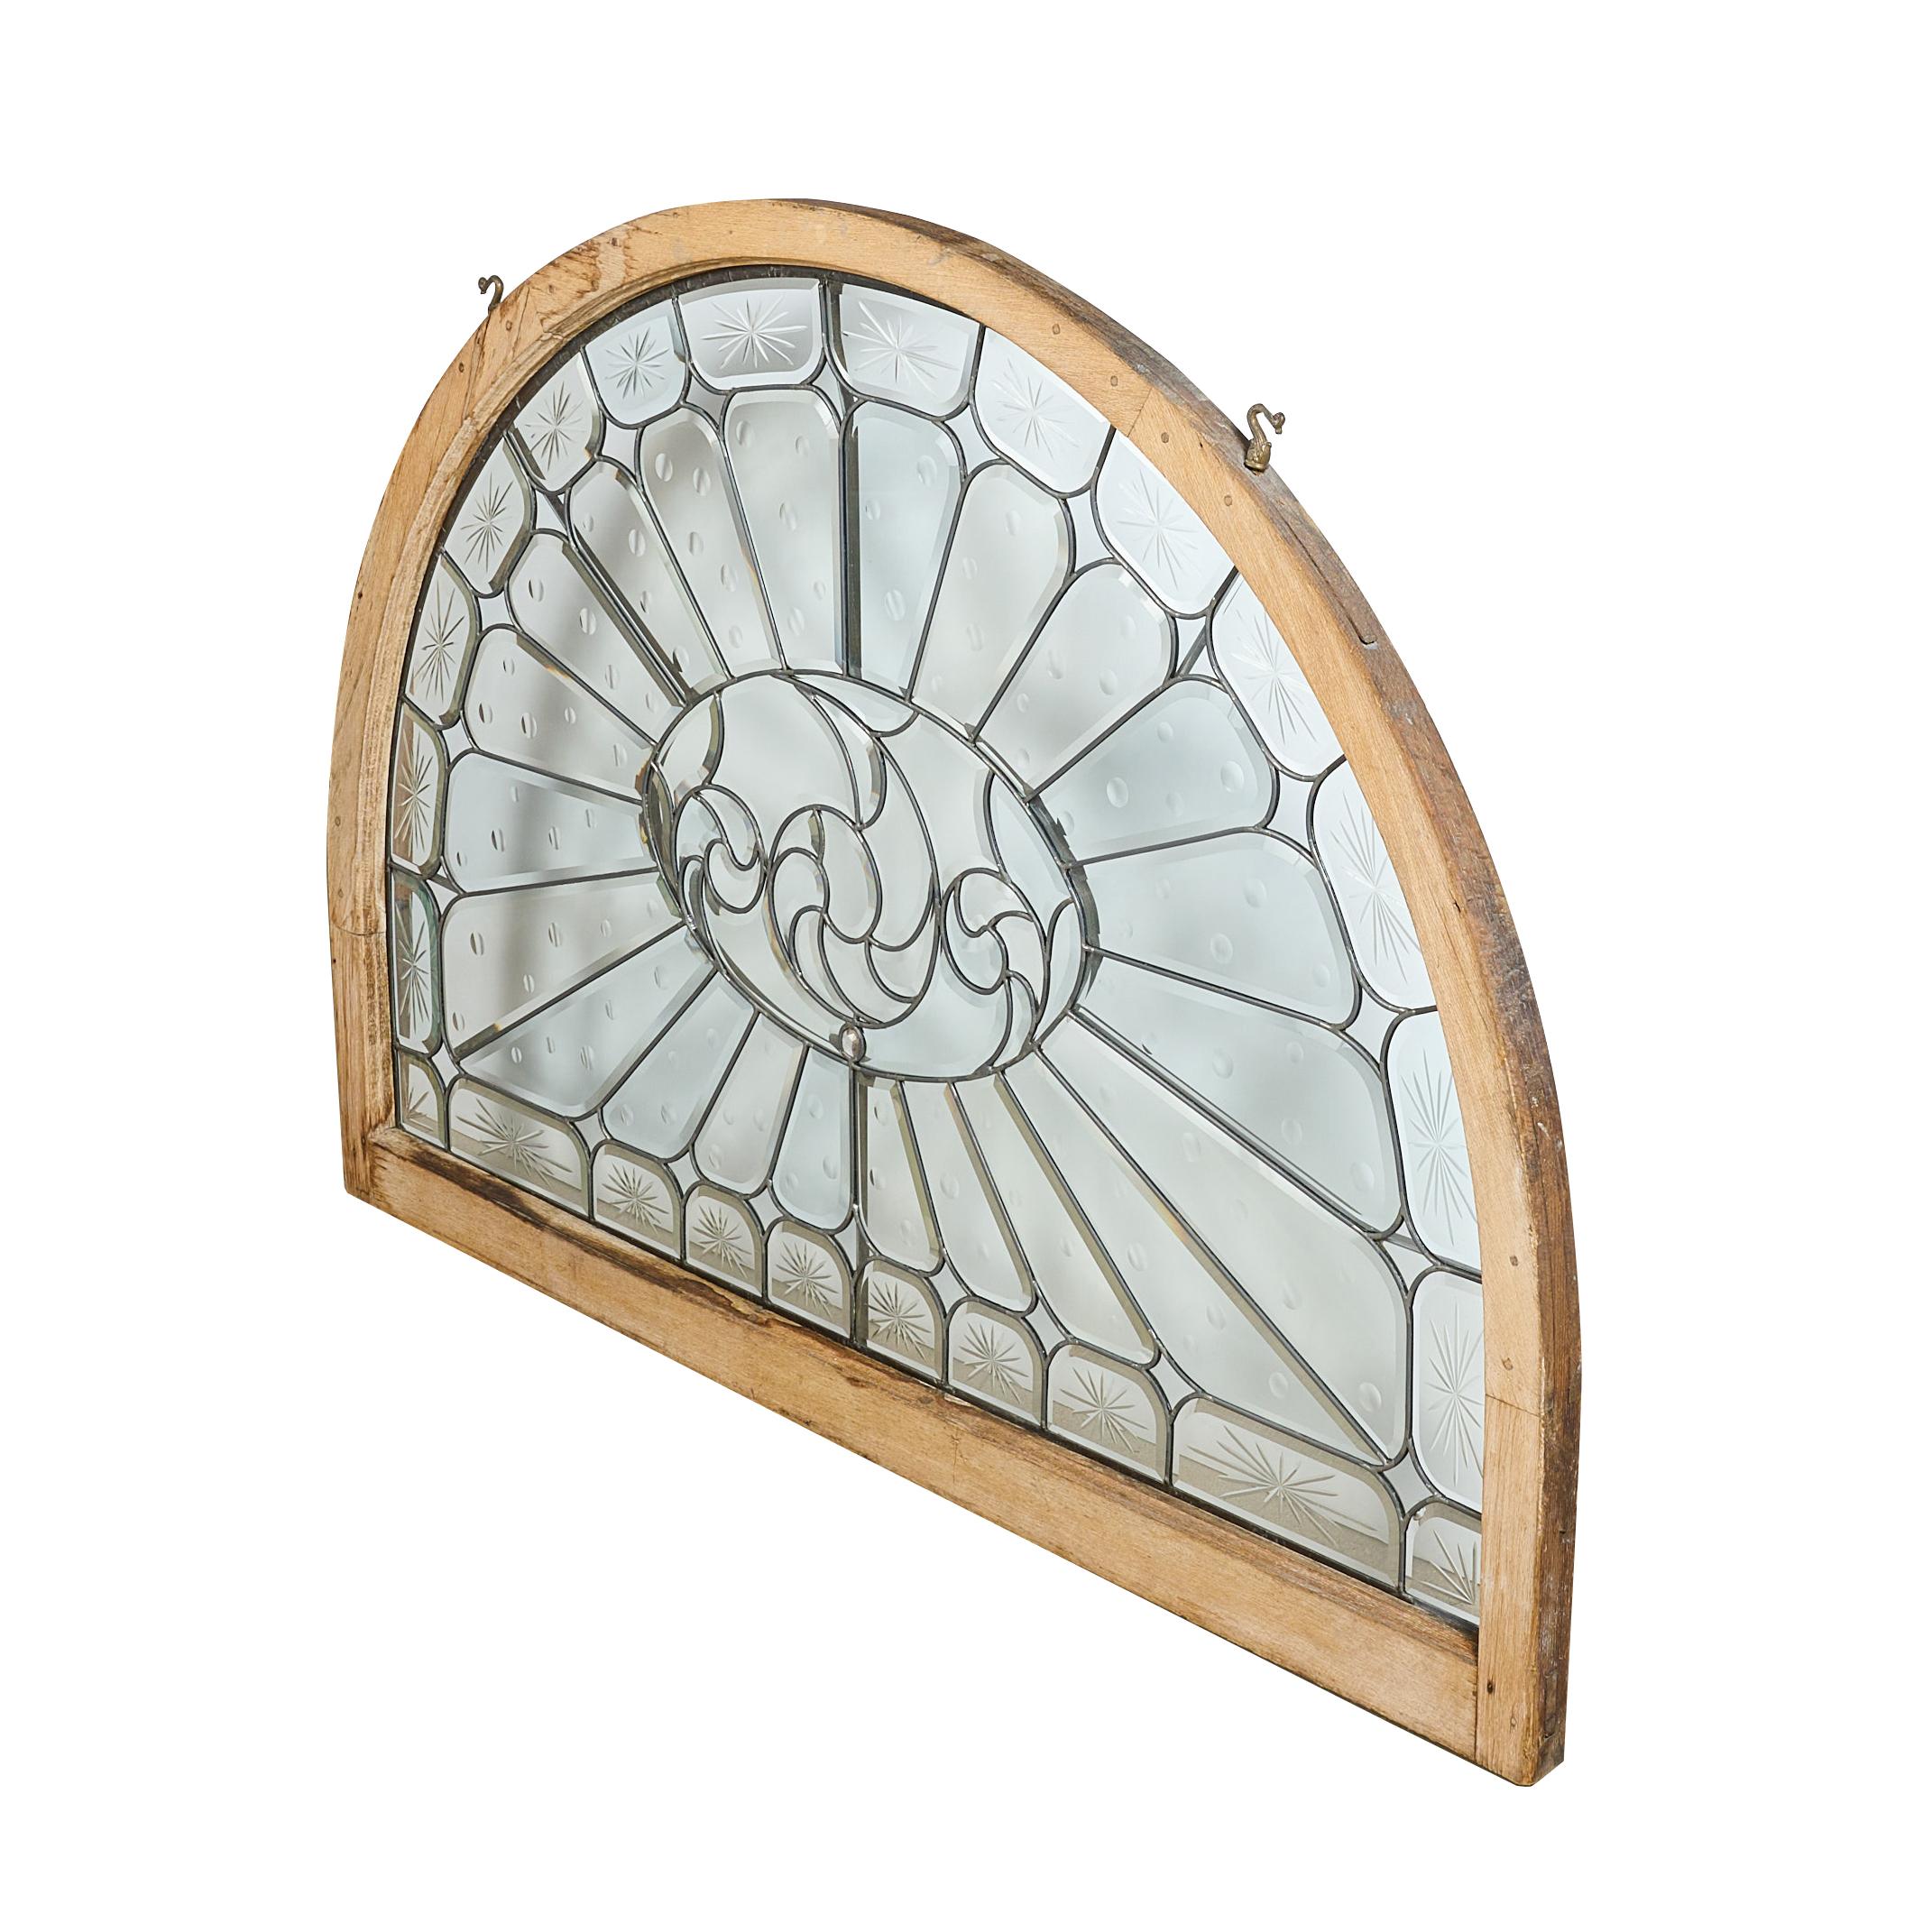 The best beveled and wheel cut arched window. Antique window restored by the world famous Mark Bogenrief.